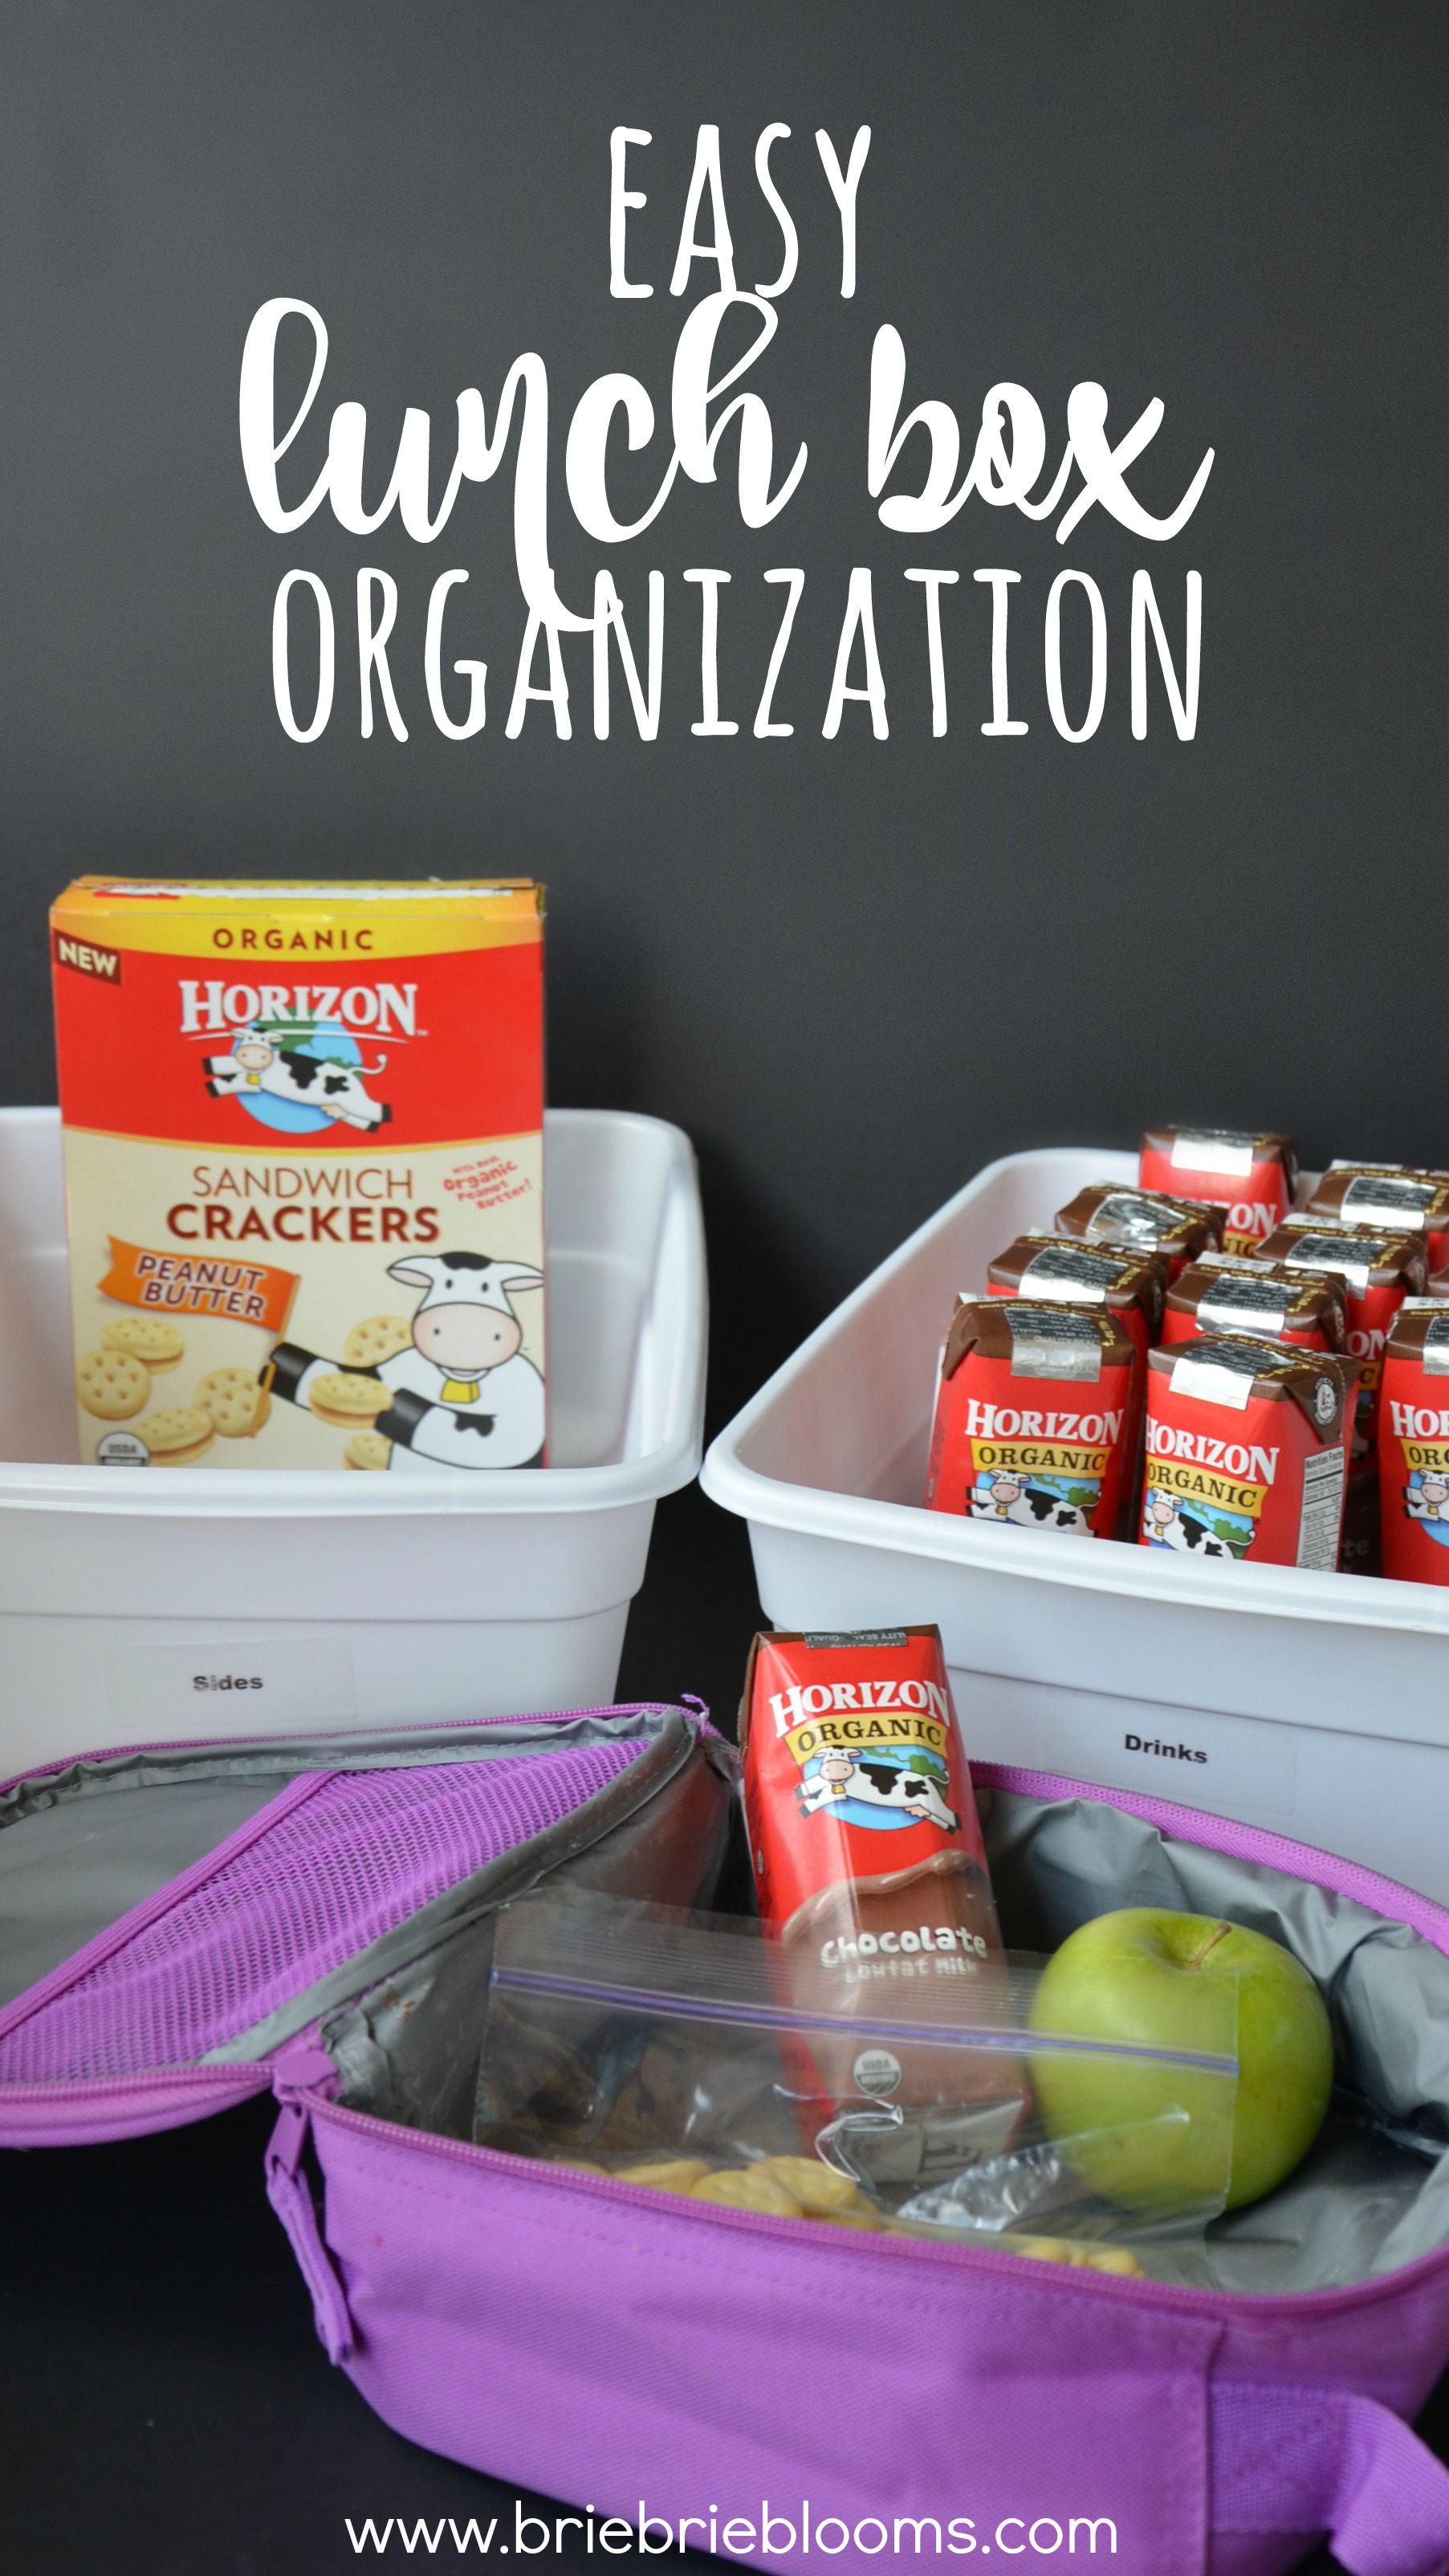 Easy Lunch Box Organization - Brie Brie Blooms